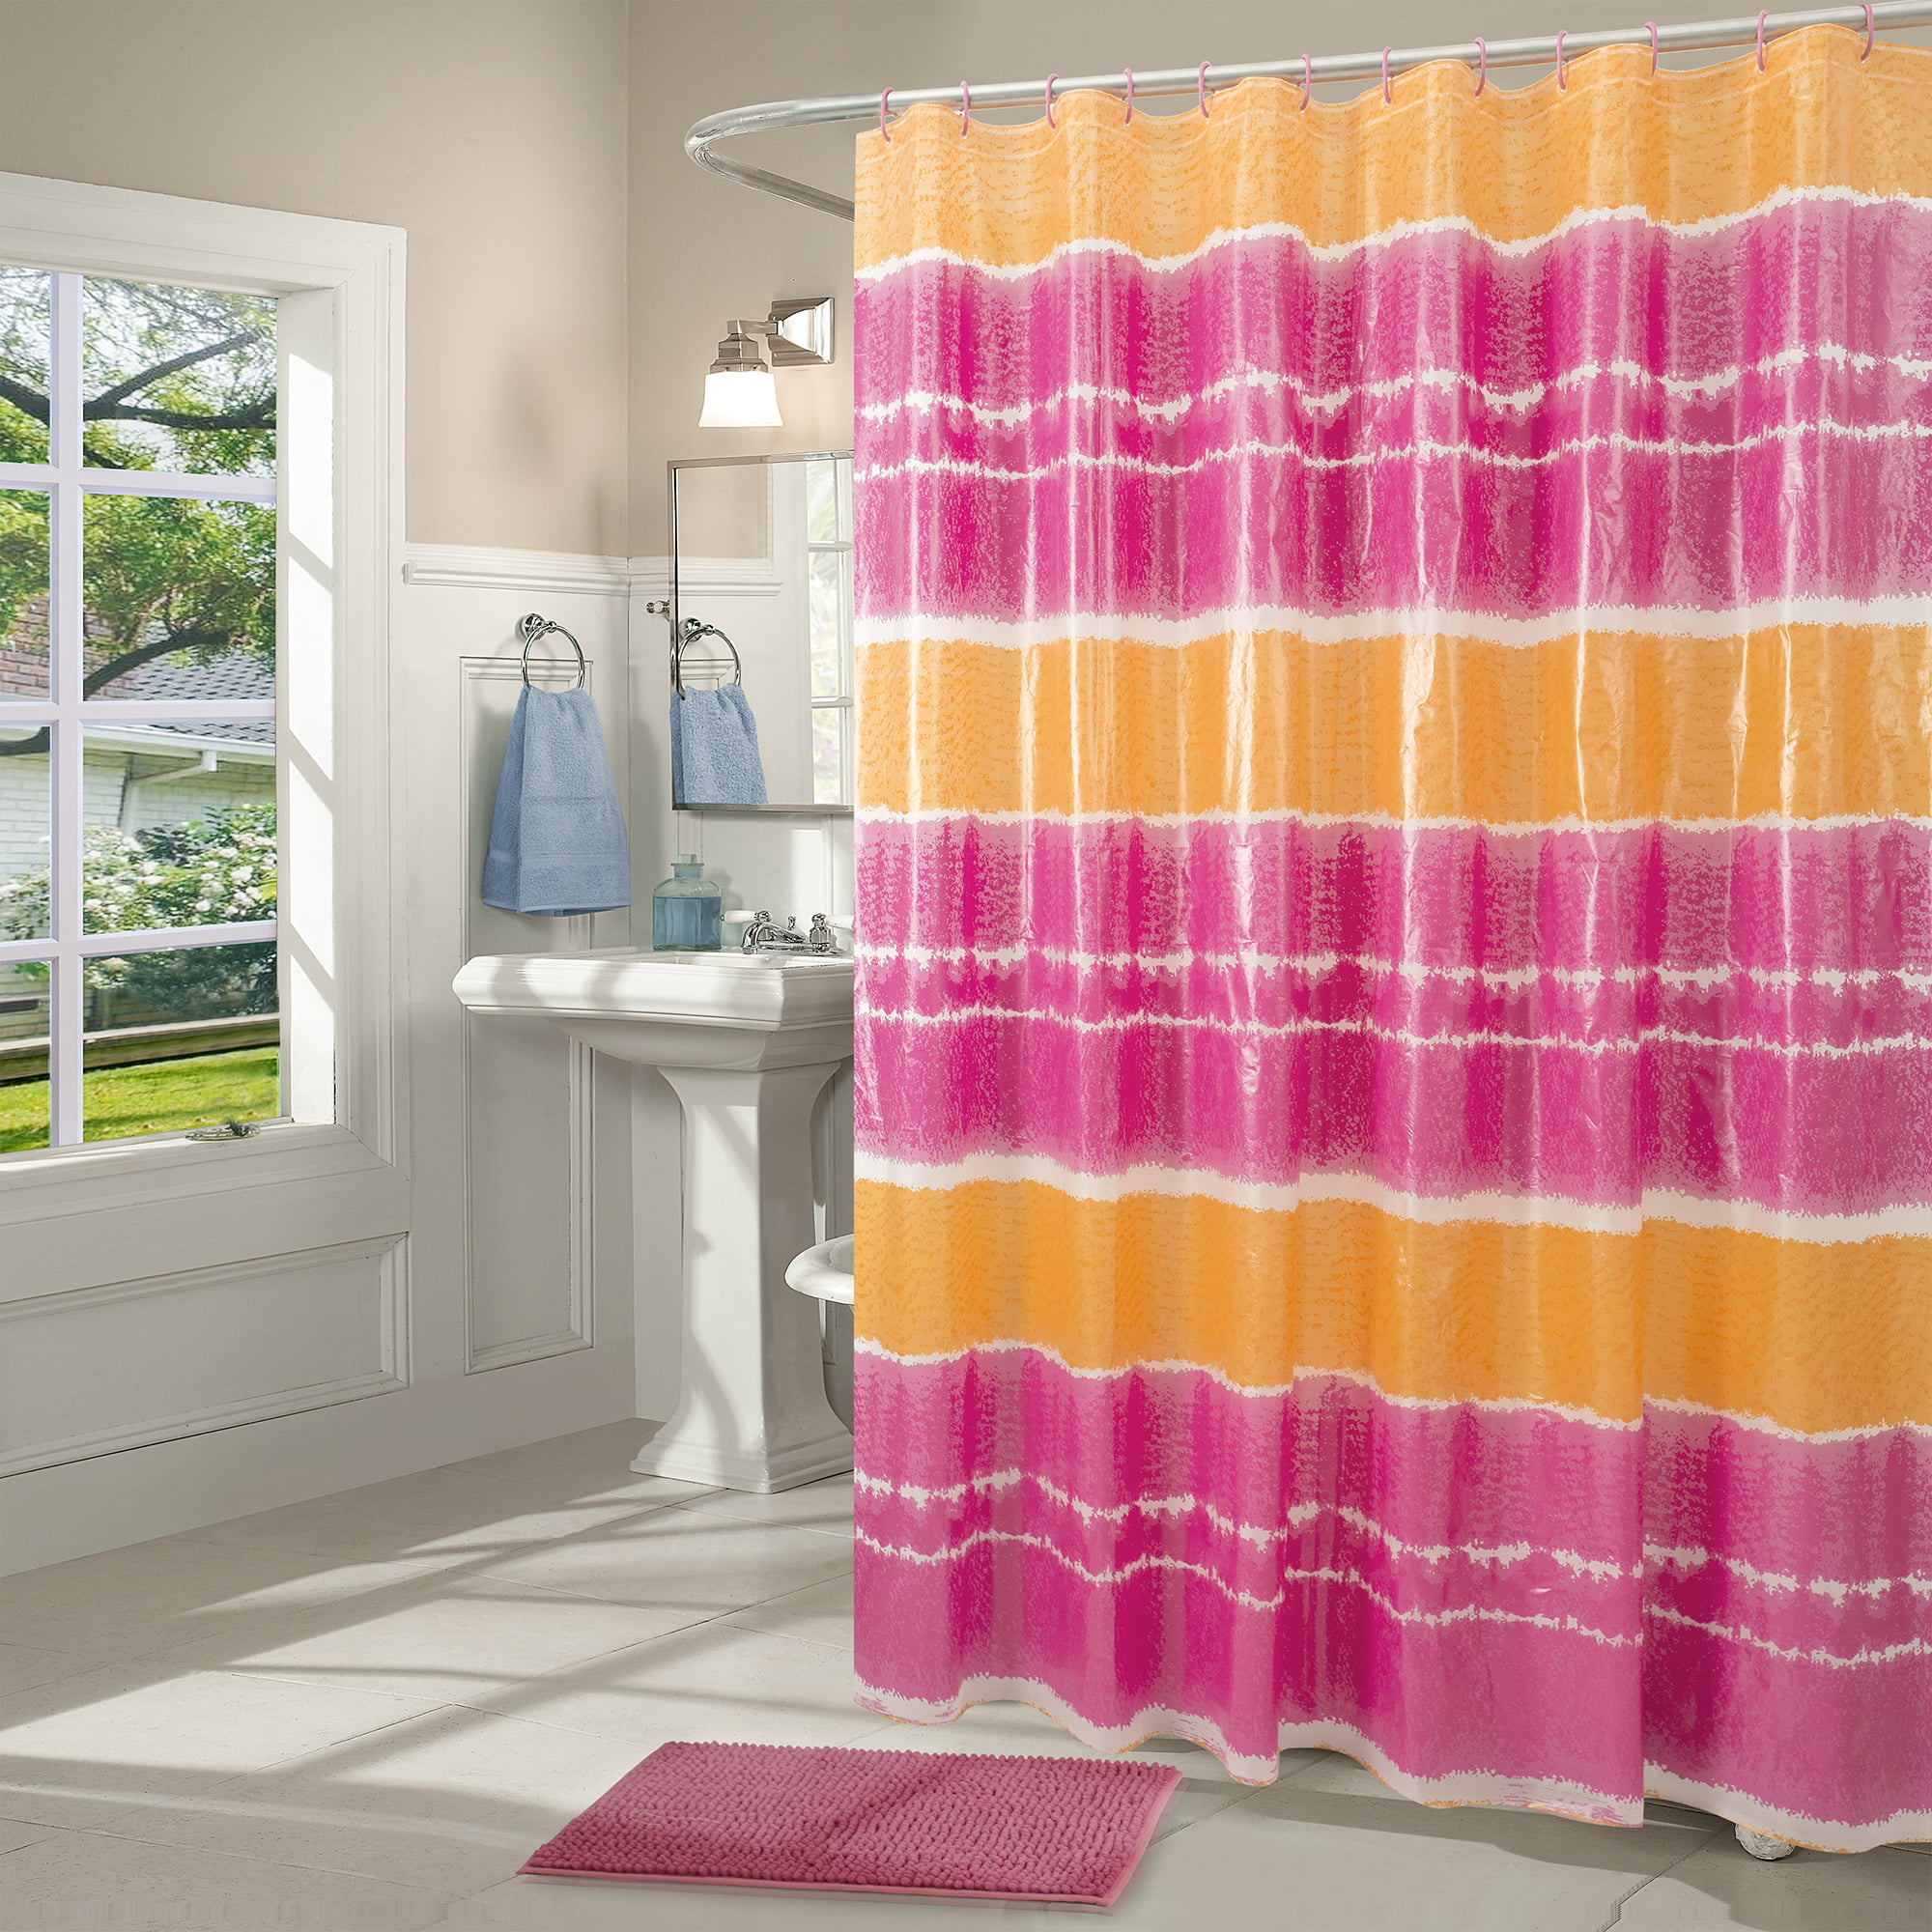 72 x72‘ Pink Geomertic Shower Curtain for Bathroom Multicolor Red Pink Orange Art Striped Iridescent Bathroom Curtains Fabric Waterproof Decoration